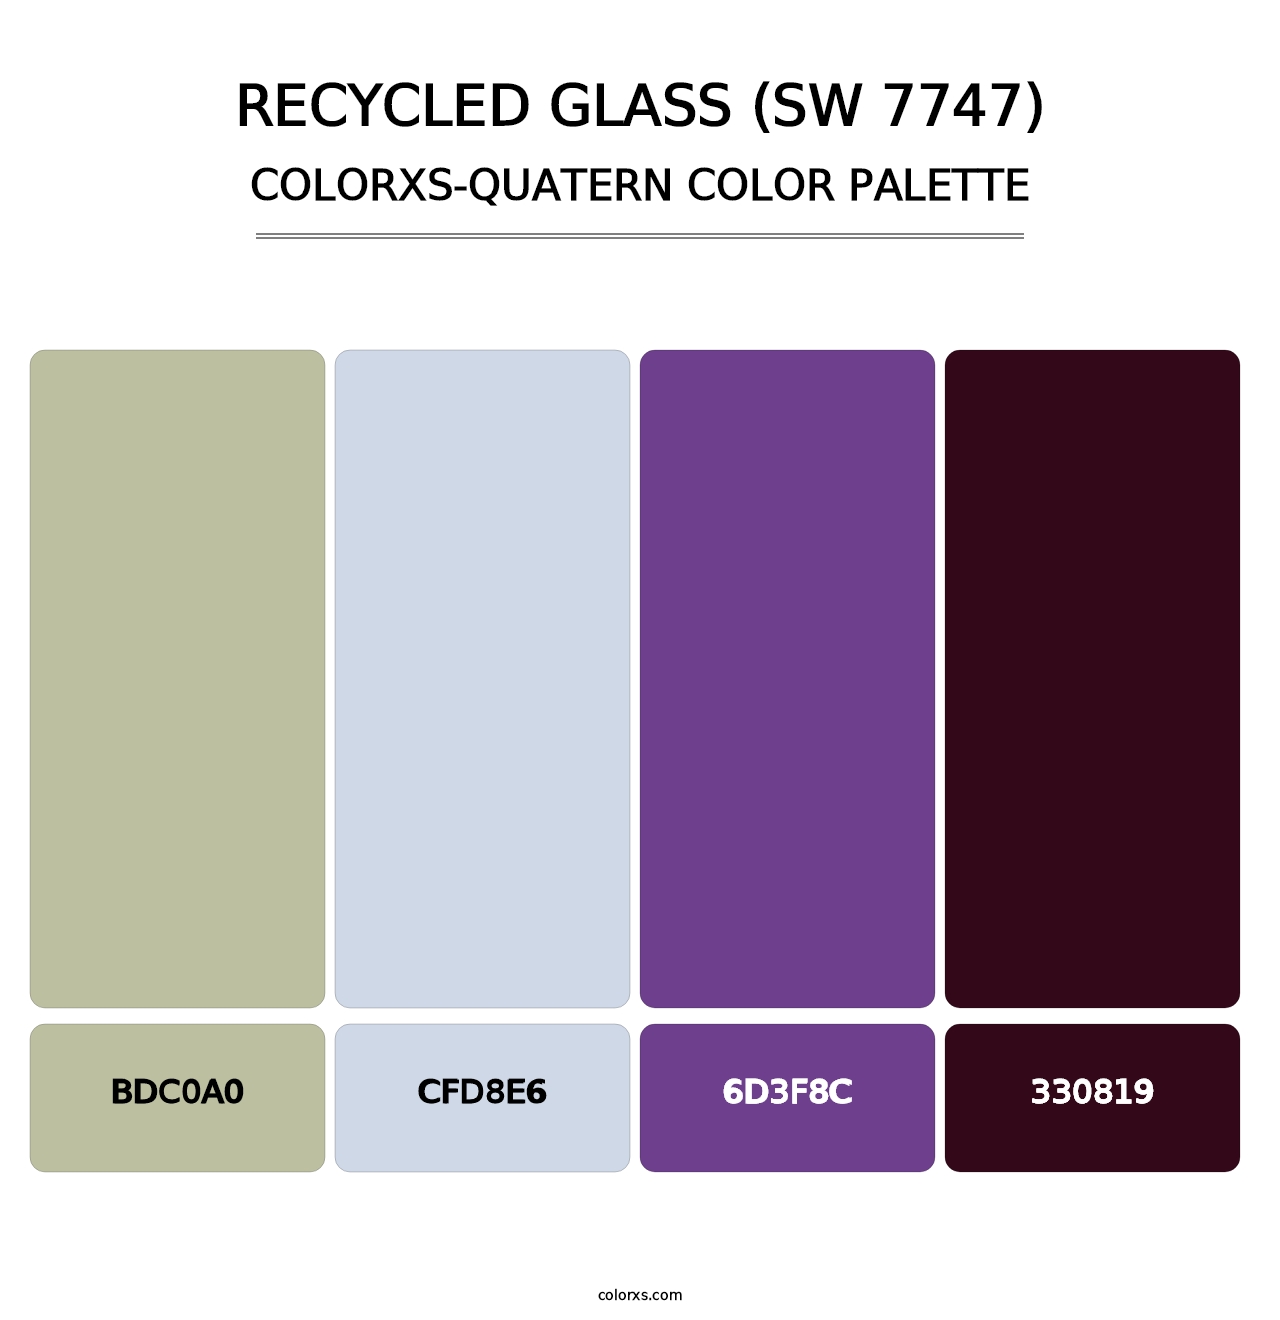 Recycled Glass (SW 7747) - Colorxs Quatern Palette